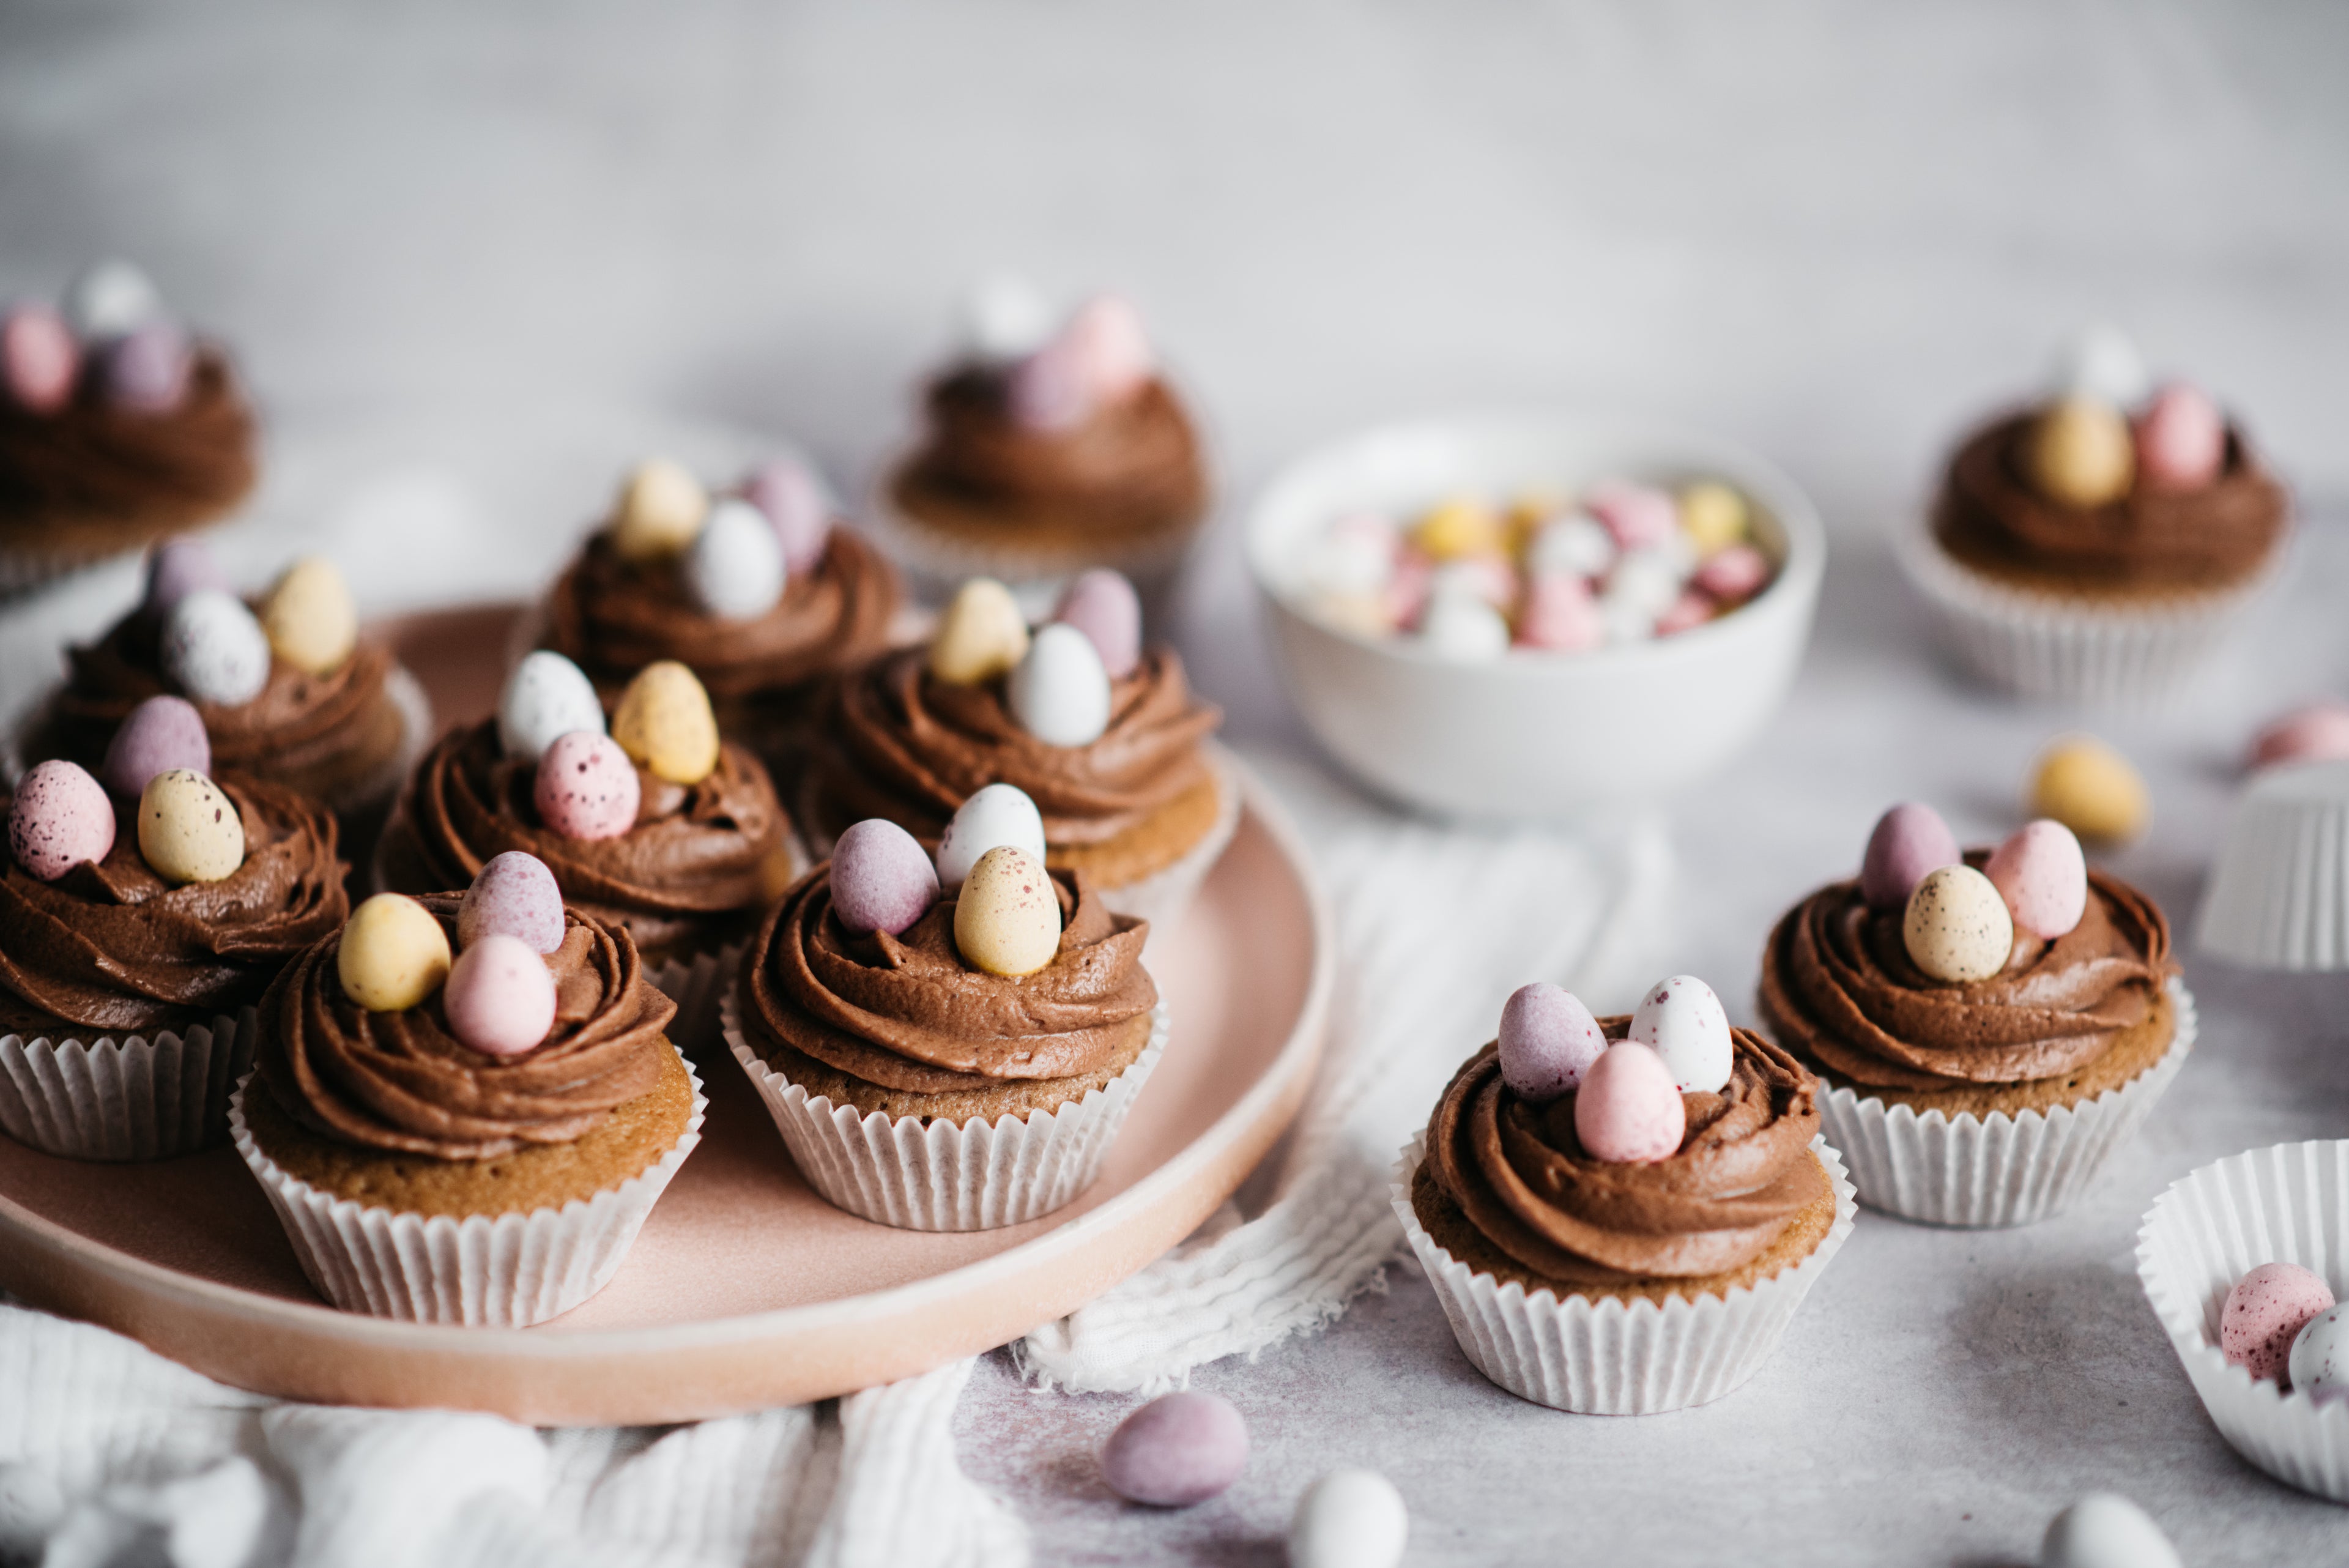 Cupcakes topped with chocolate icing and mini eggs